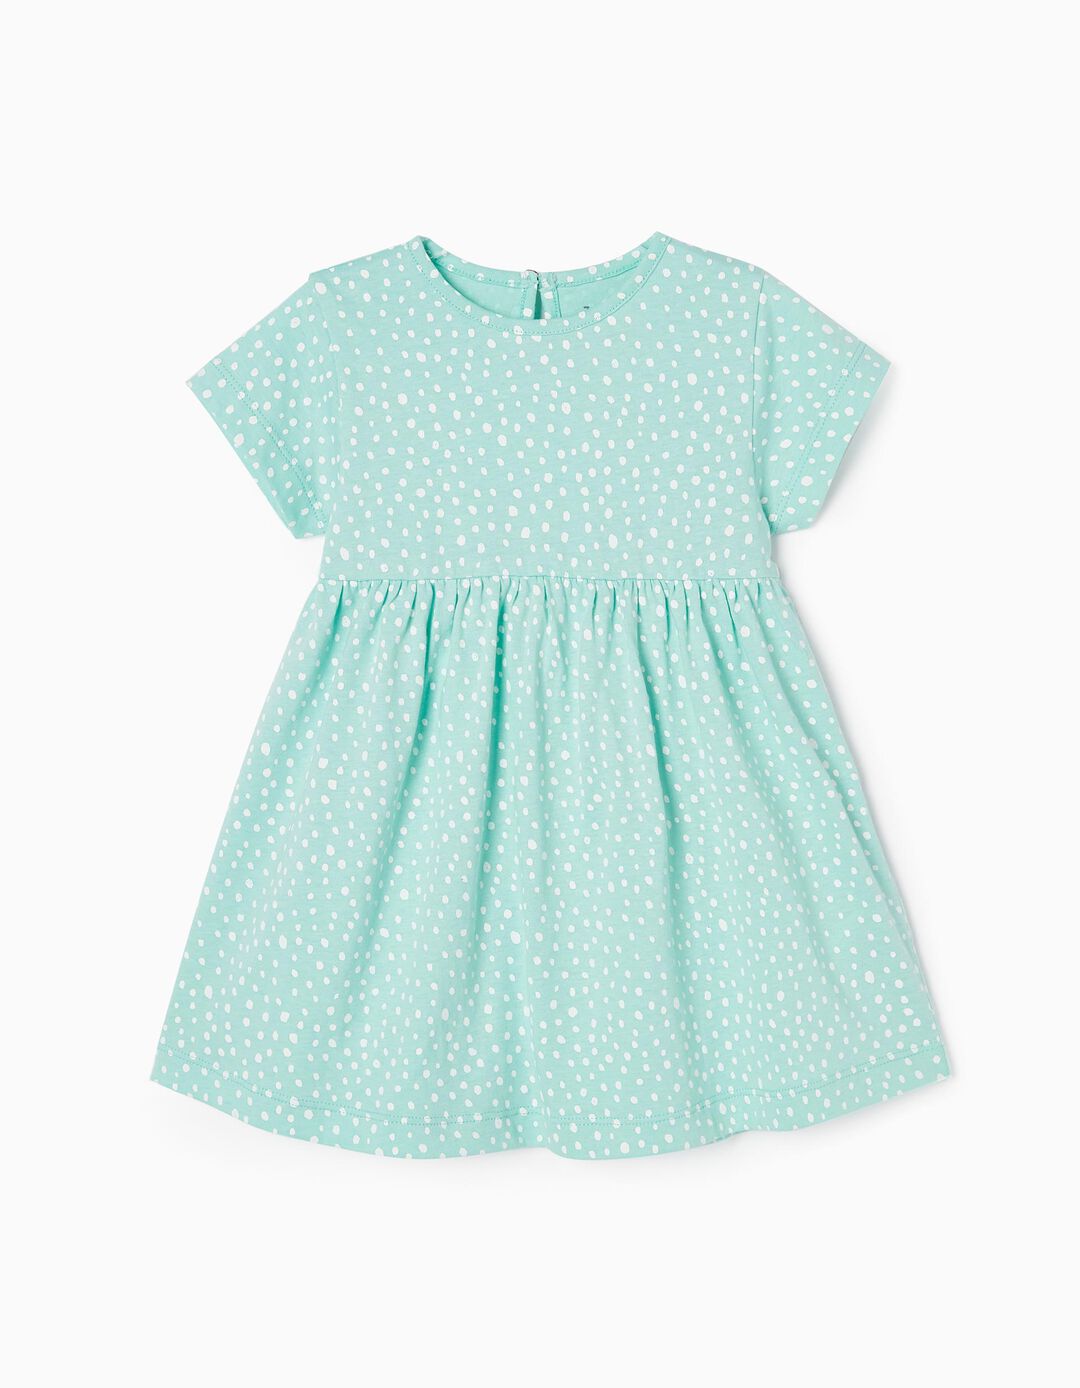 Printed Dress in Cotton for Baby Girls, Aqua Green 